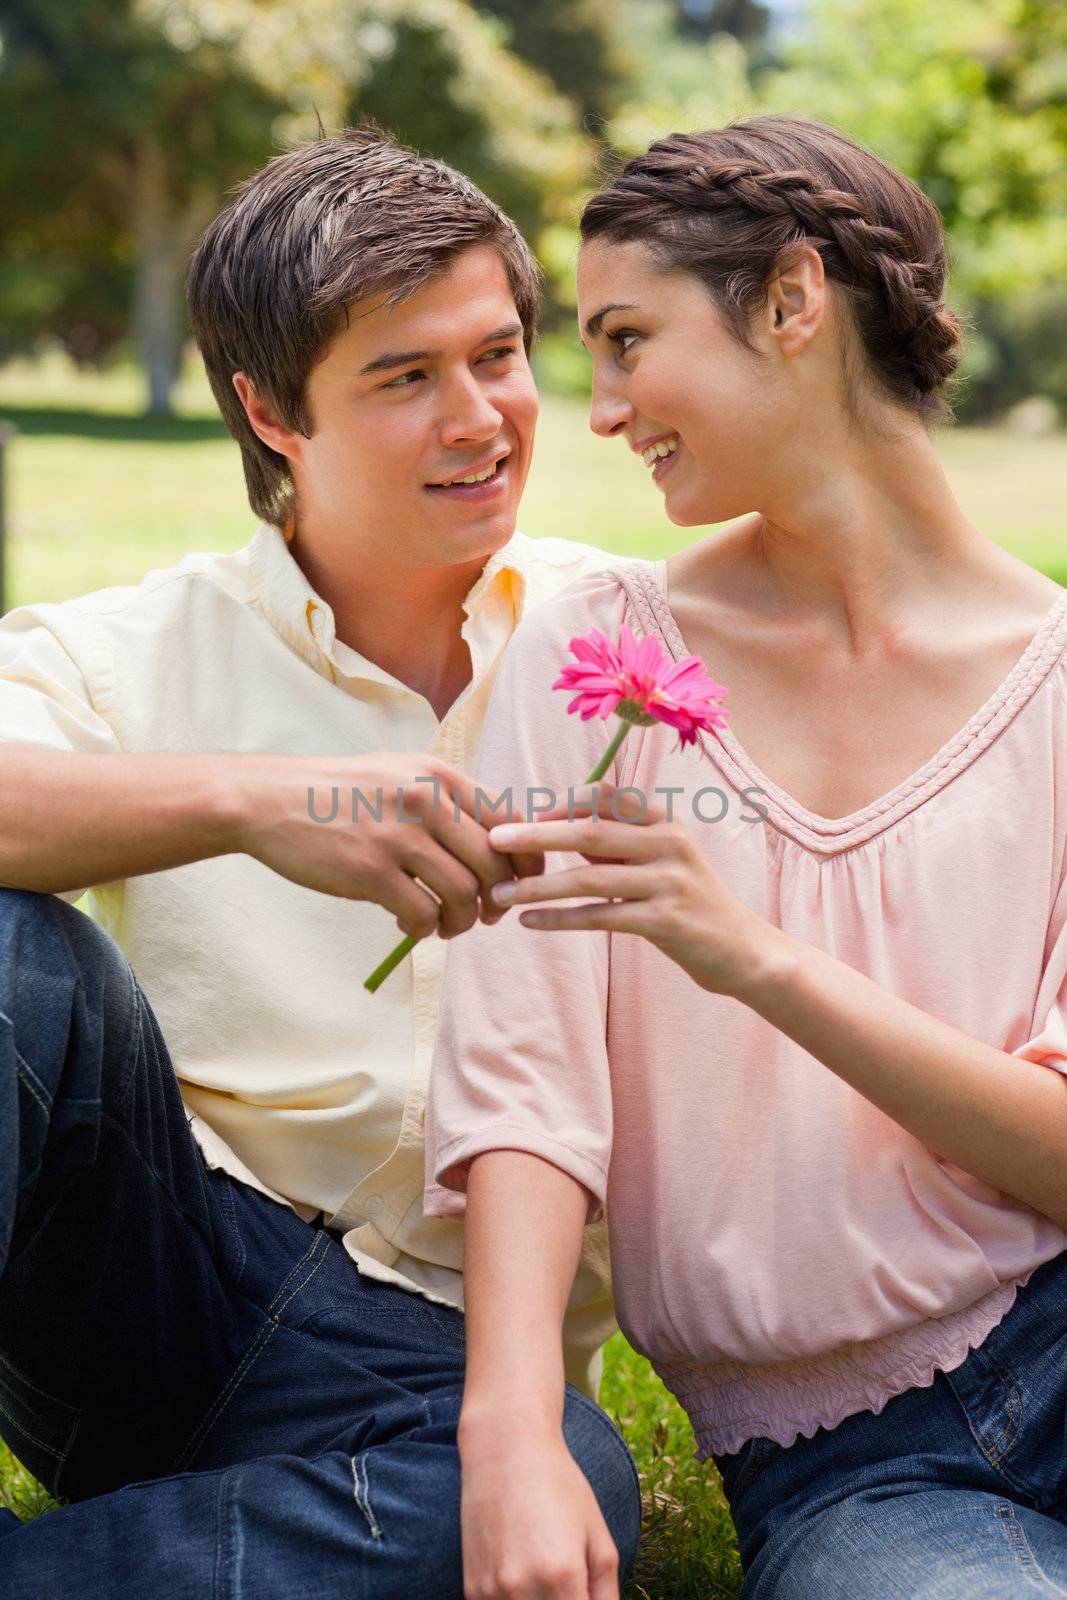 Man giving a flower to a woman by Wavebreakmedia